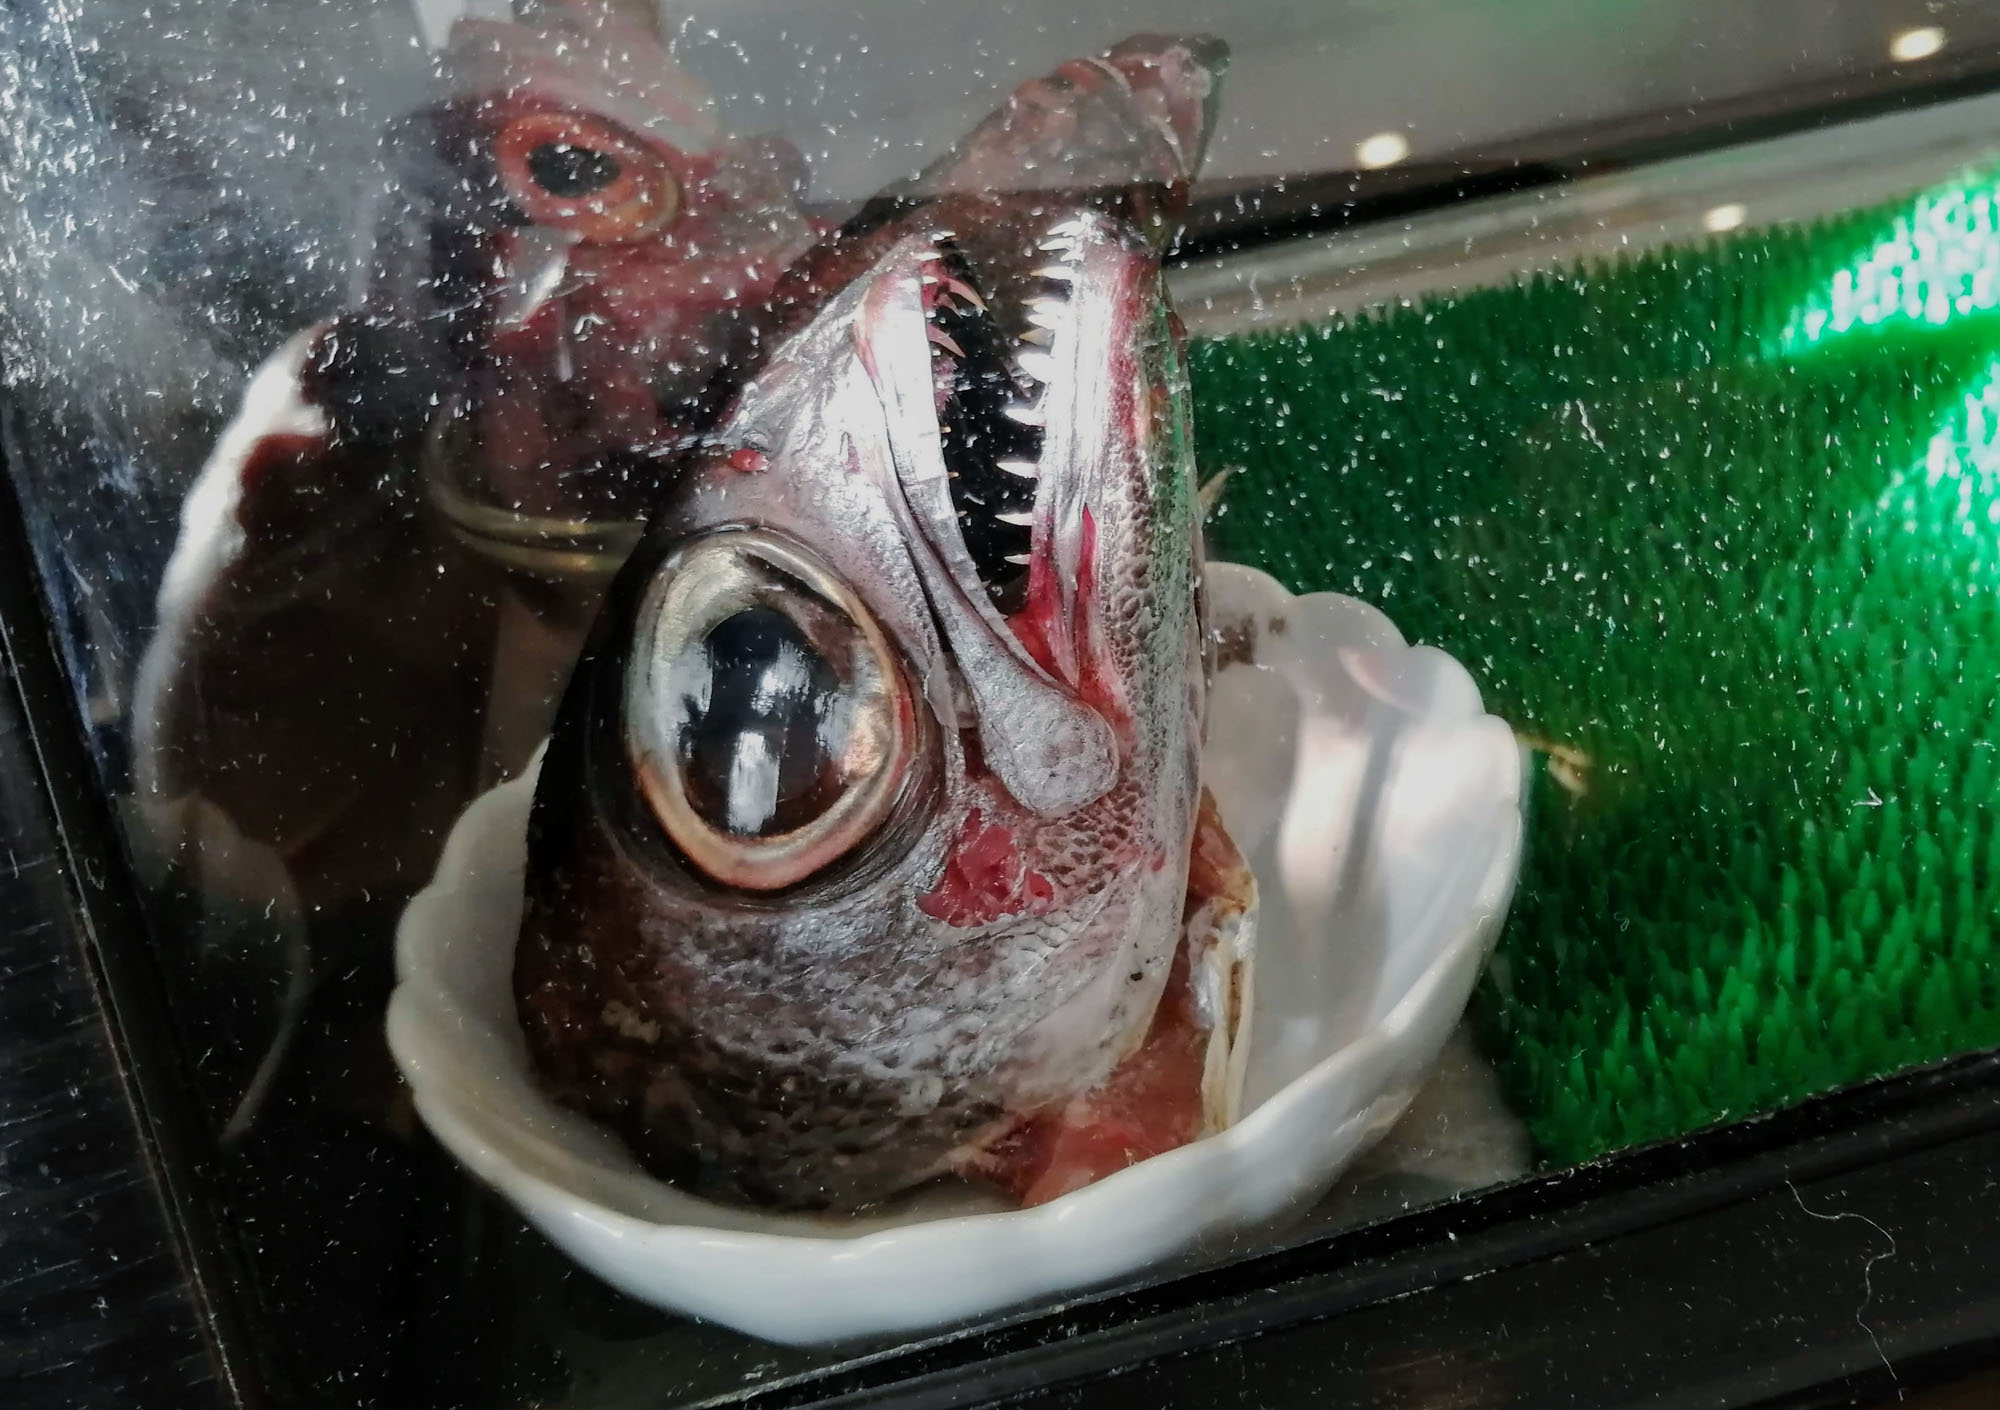  A sushi display case showing the scary head of a dead fish with large eyes and large teeth. Photo by Paul Young.